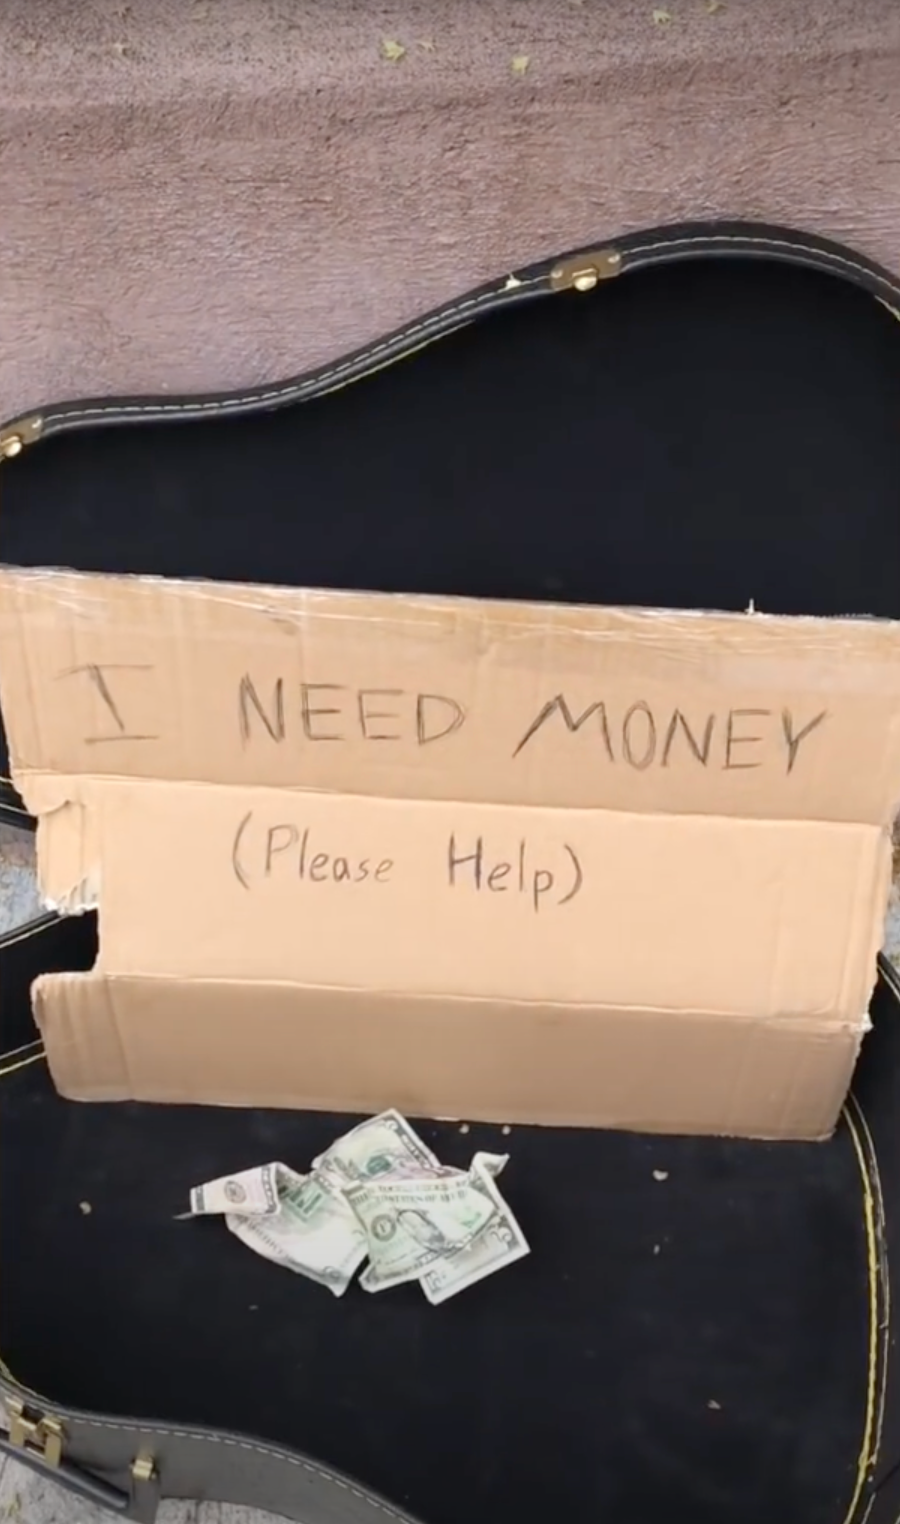 Jonathan's guitar case carrying a sign asking for money as he busks on the streets | Source: Youtube.com/bild